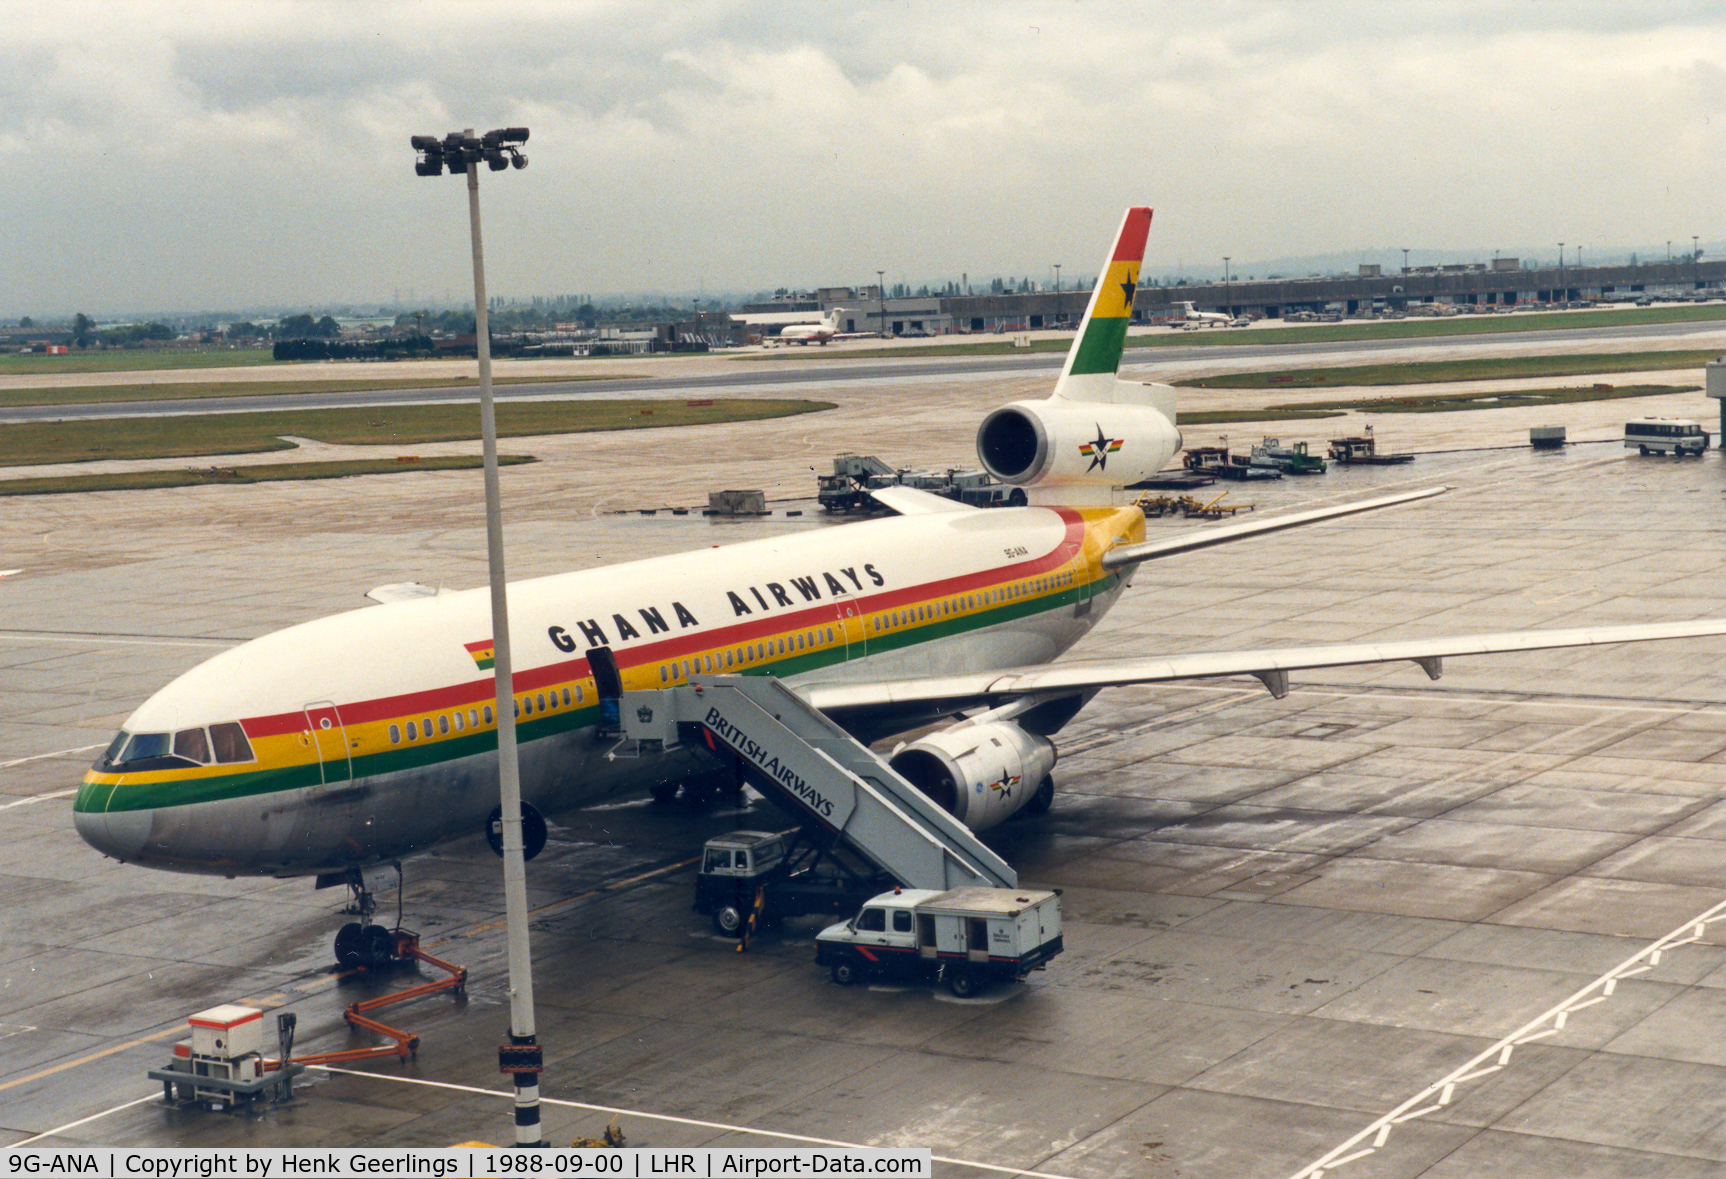 9G-ANA, 1983 McDonnell Douglas DC-10-30 C/N 48286, Ghana Airways. DC-10 lsd from and operated by KLM